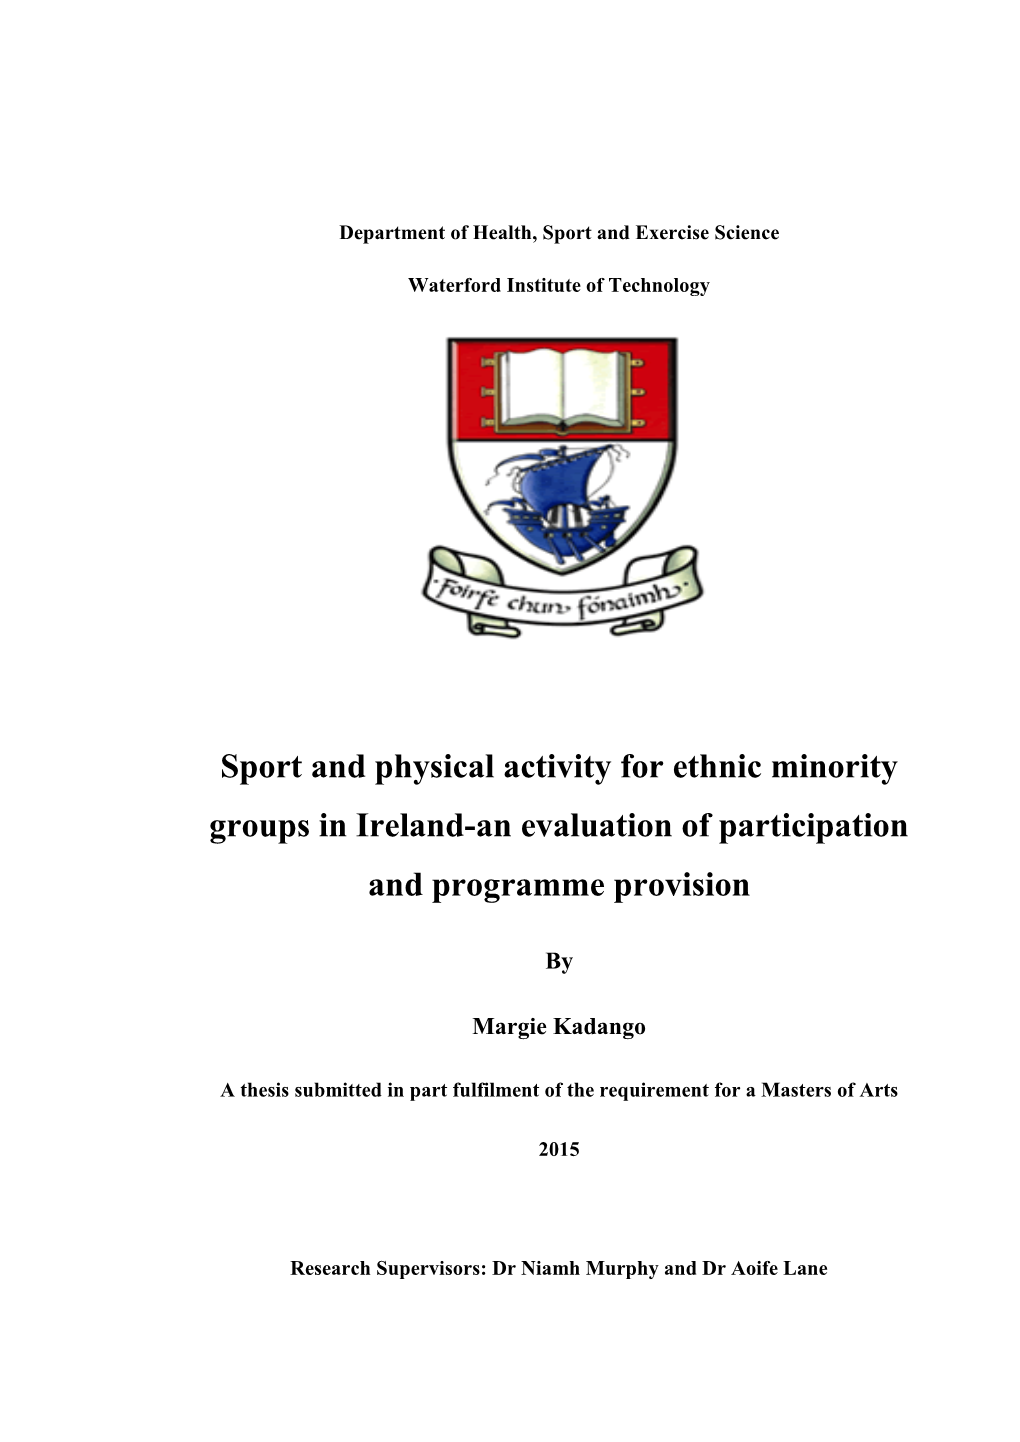 Sport and Physical Activity for Ethnic Minority Groups in Ireland-An Evaluation of Participation and Programme Provision